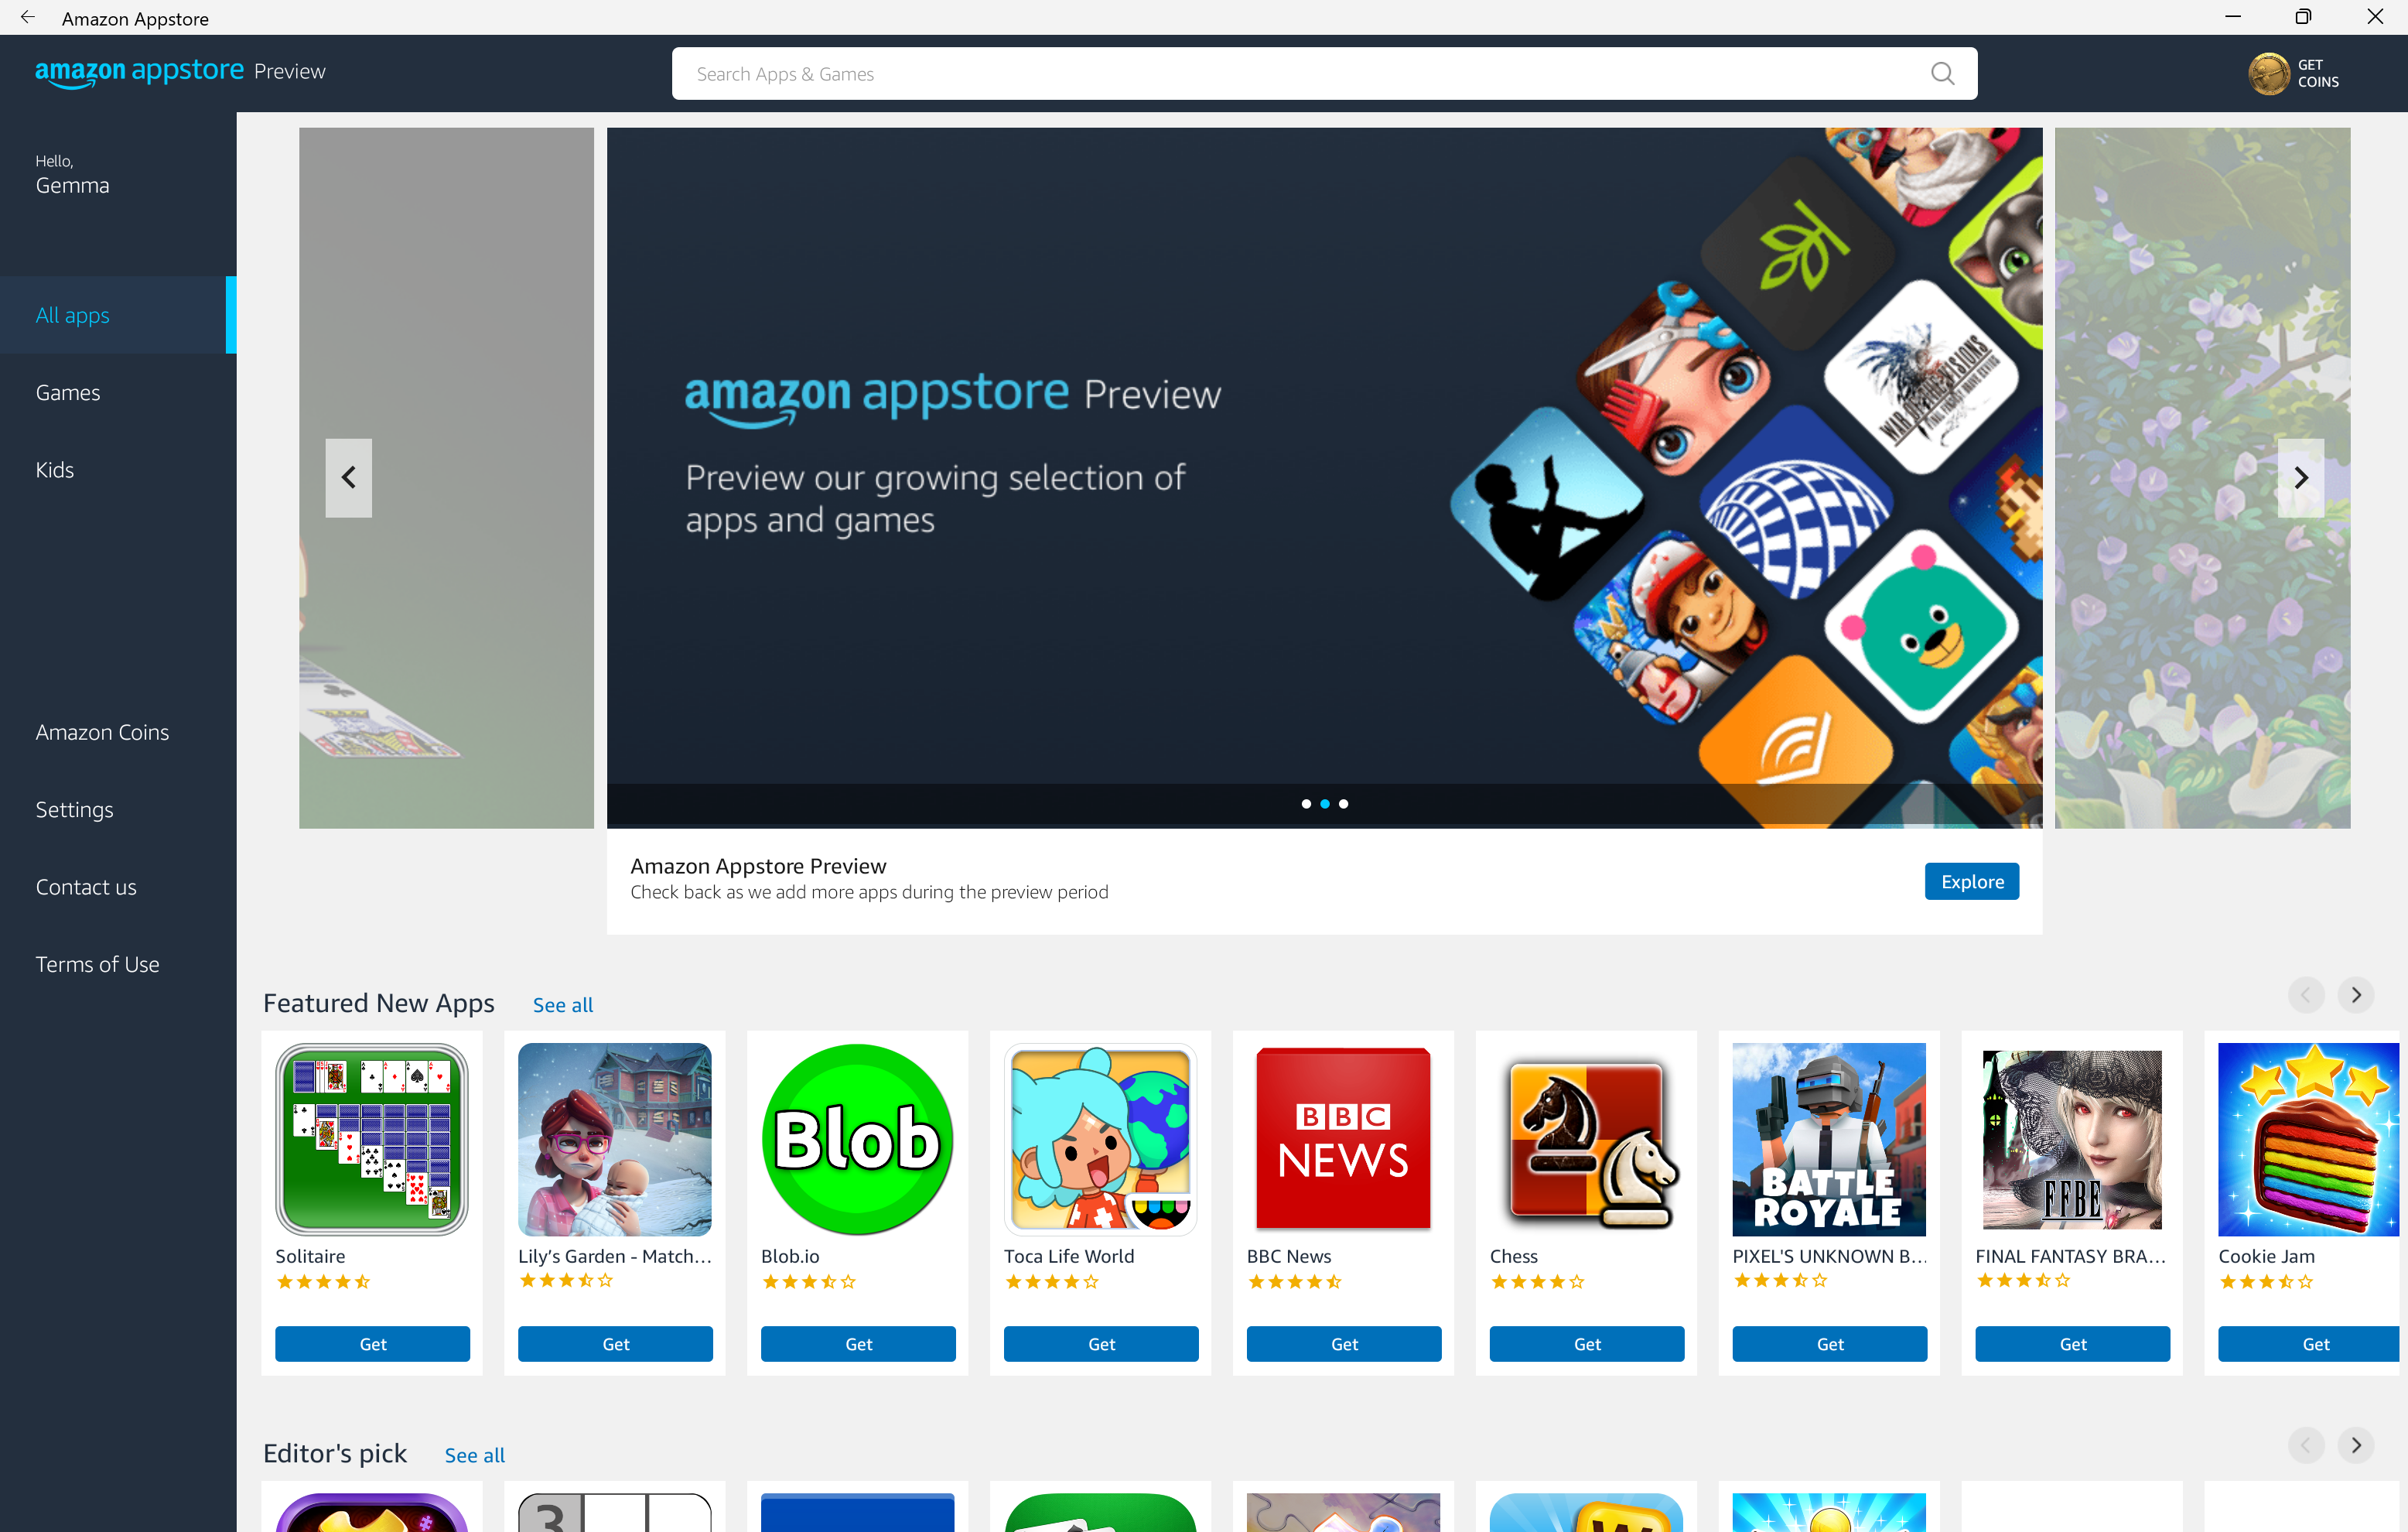 Use the Amazon Appstore